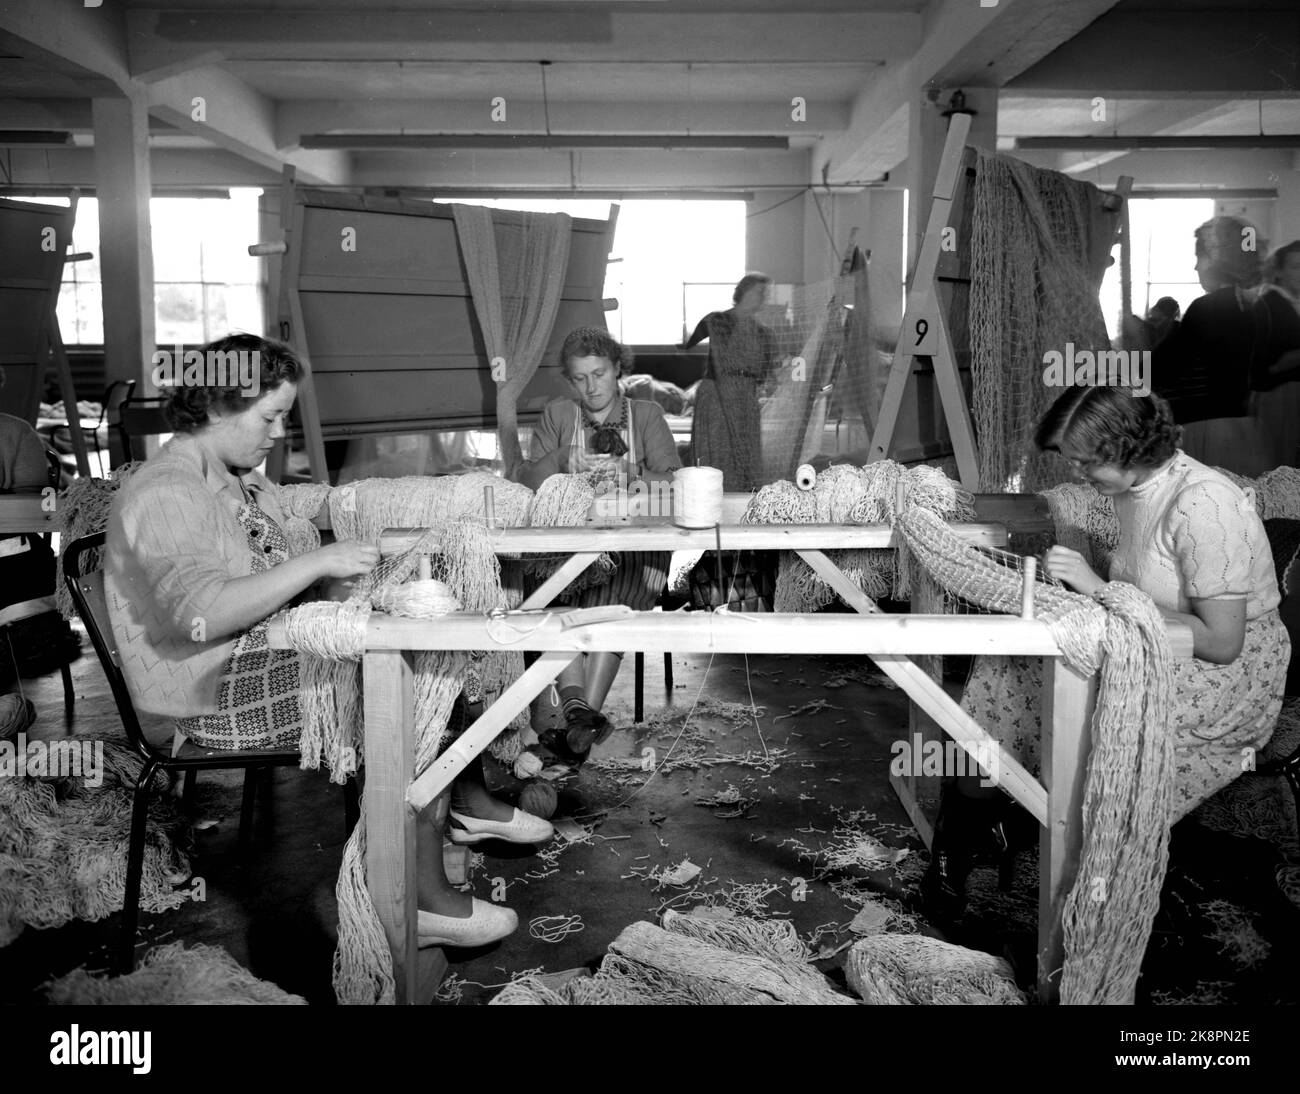 Sverre borretzen current ntb textile fishing women fishing gear working  Black and White Stock Photos & Images - Alamy